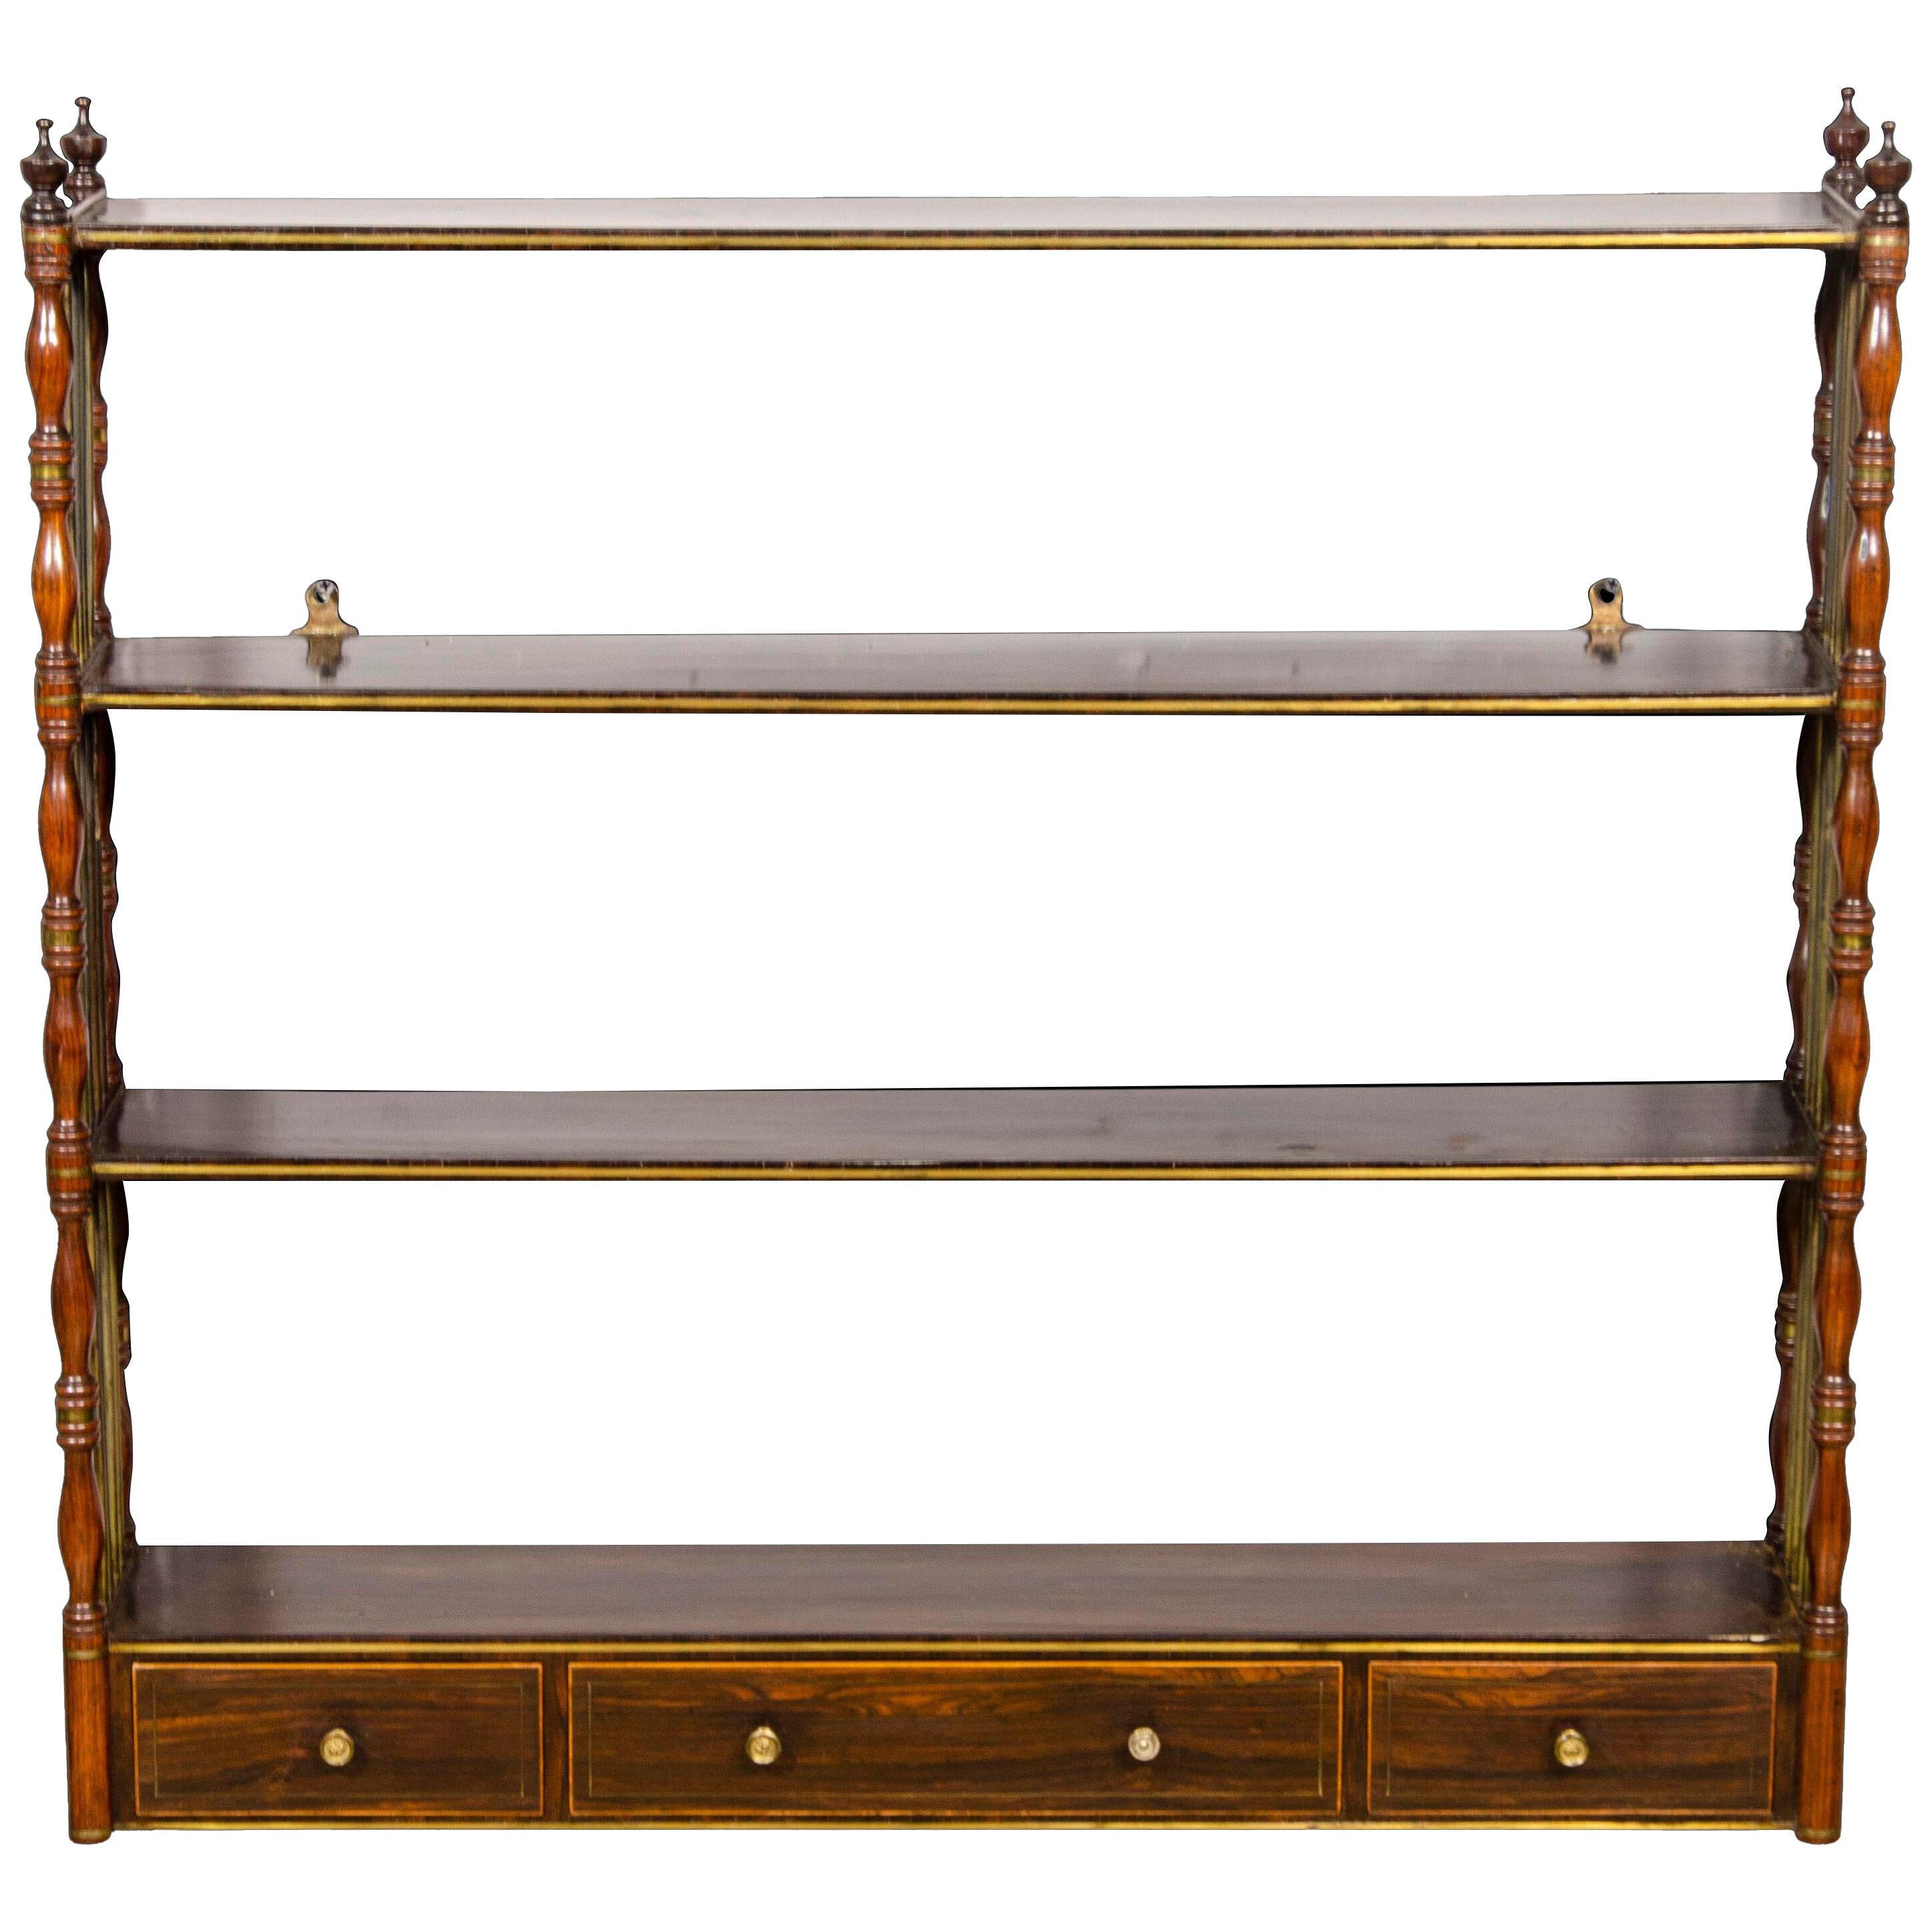 Regency Rosewood and Brass Inlaid Hanging Wall Shelf